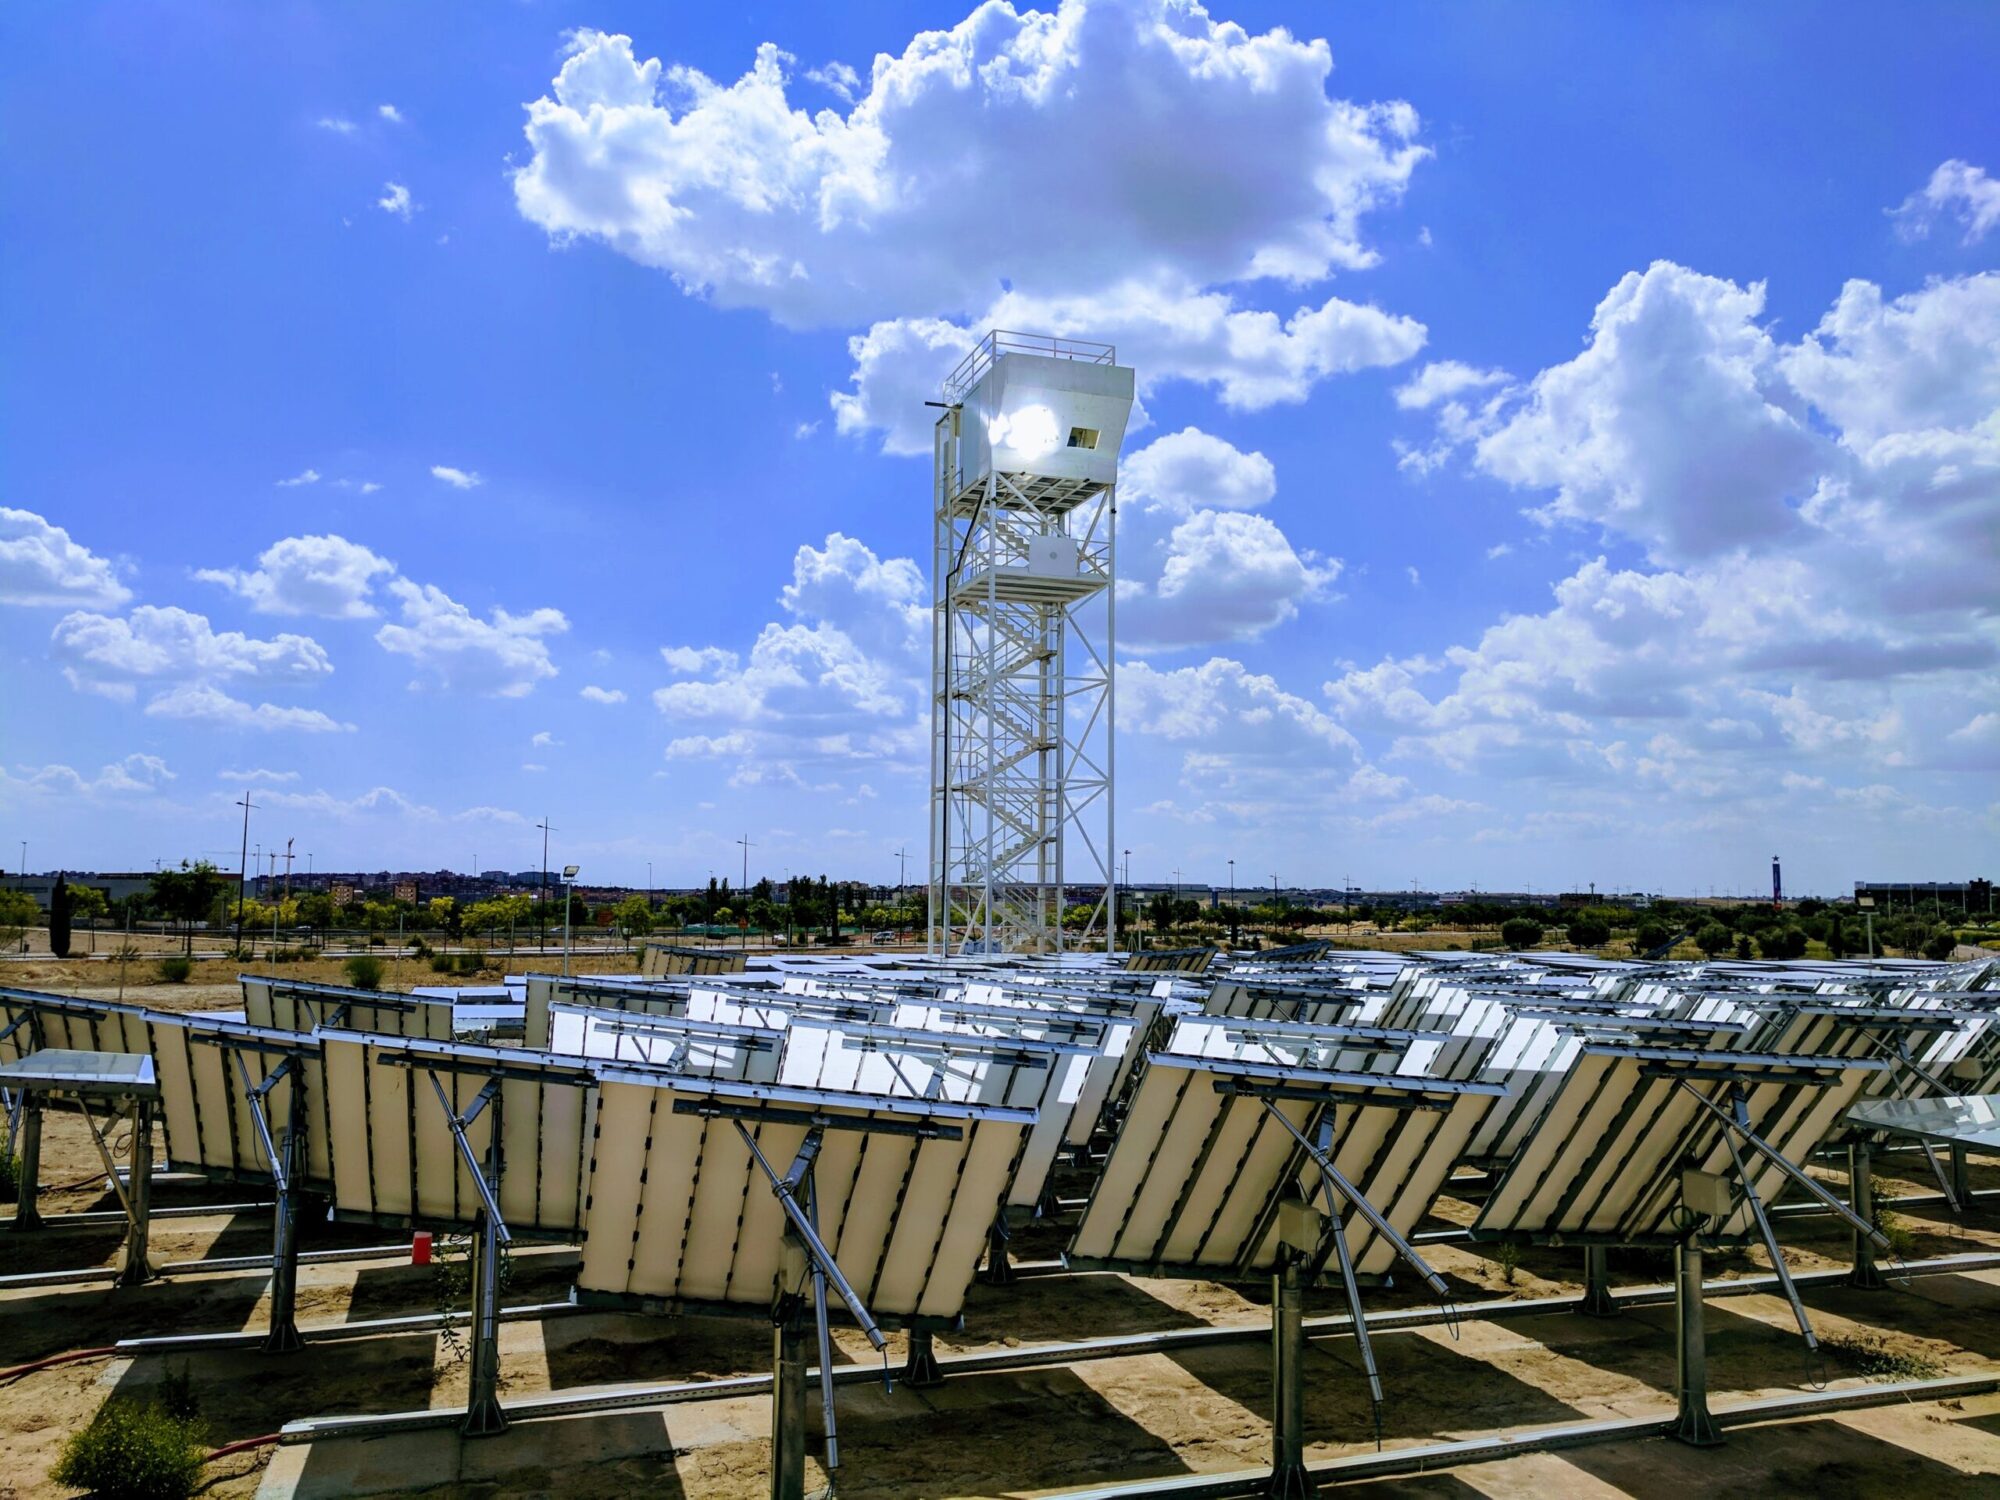 This solar tower makes jet fuel from sunbeams, water, and gas